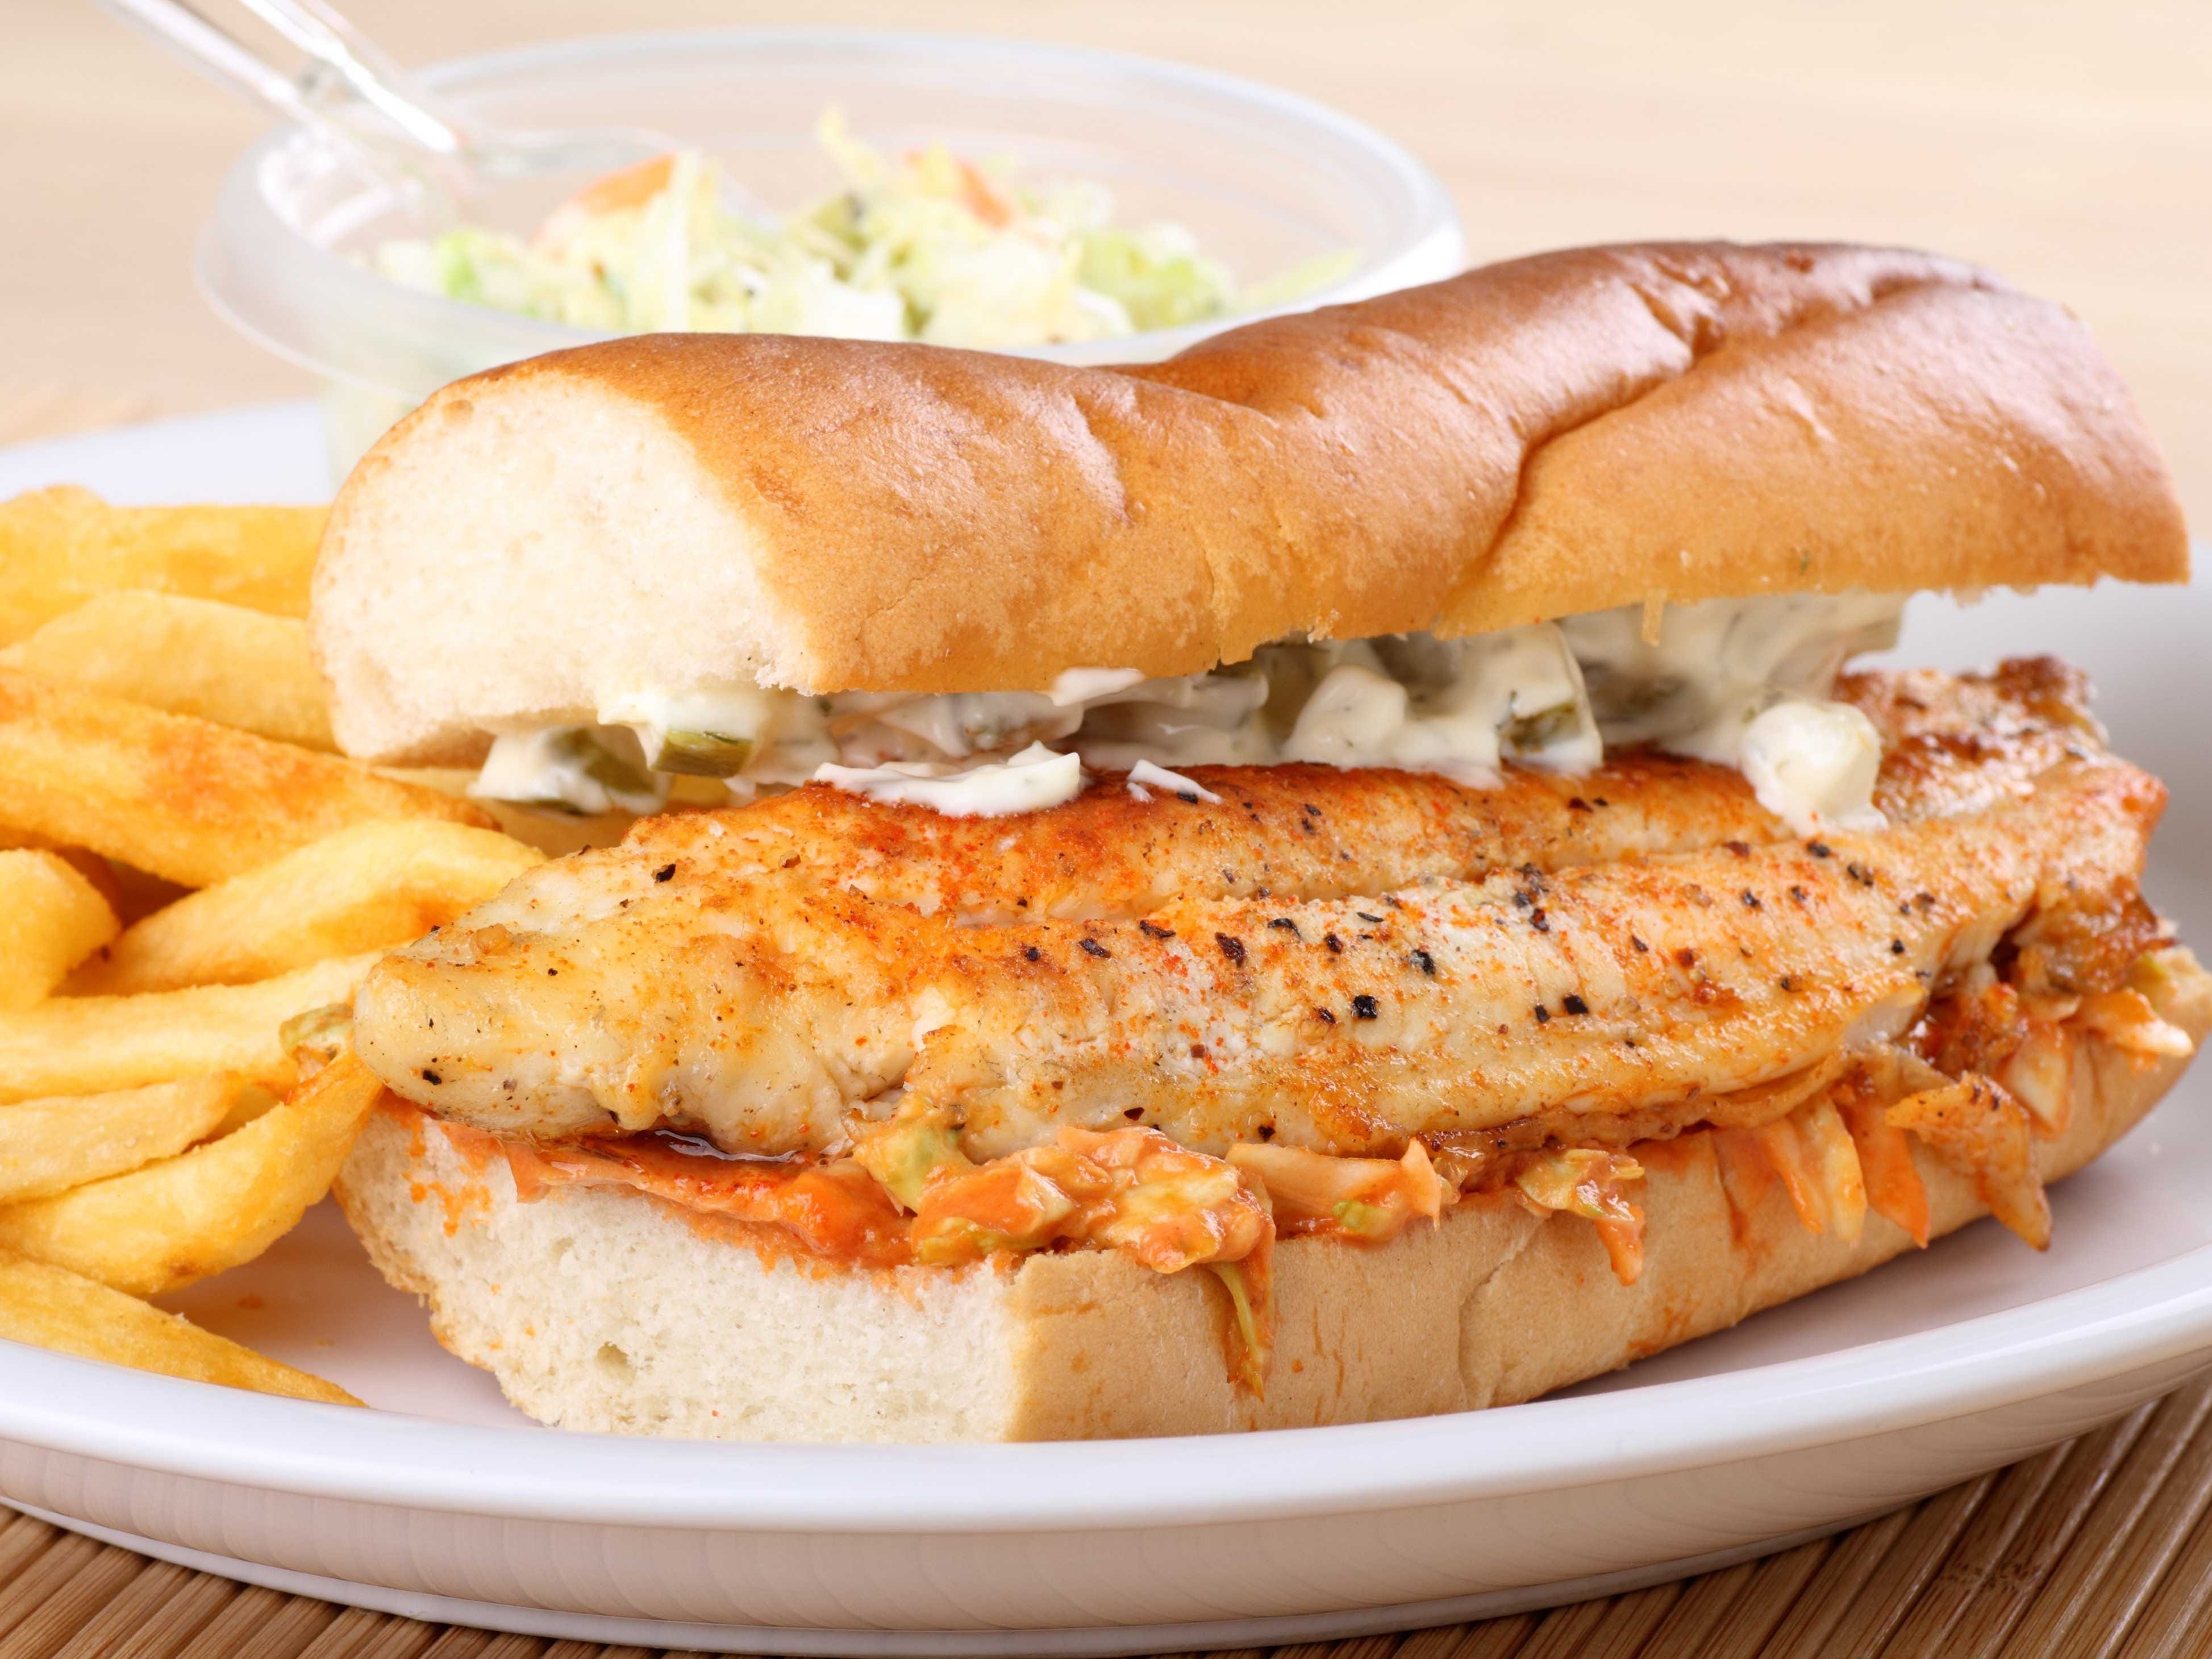 <p>Caught locally and tucked between two buttered buns, the deep-fried catfish sandwich is best paired with a side of fries and slaw.</p>